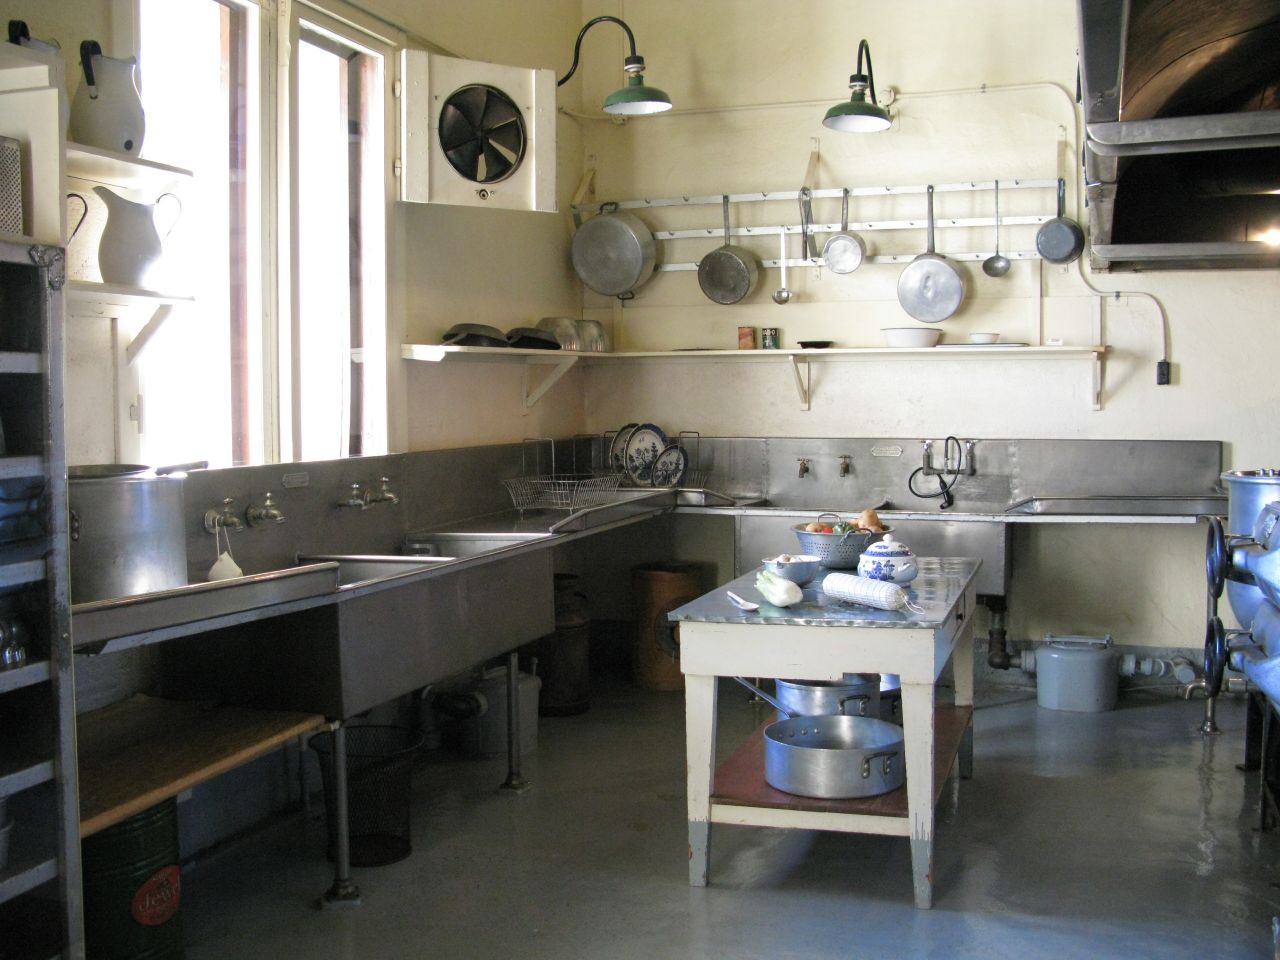 a kitchen with metal appliances and pots hanging from the ceiling